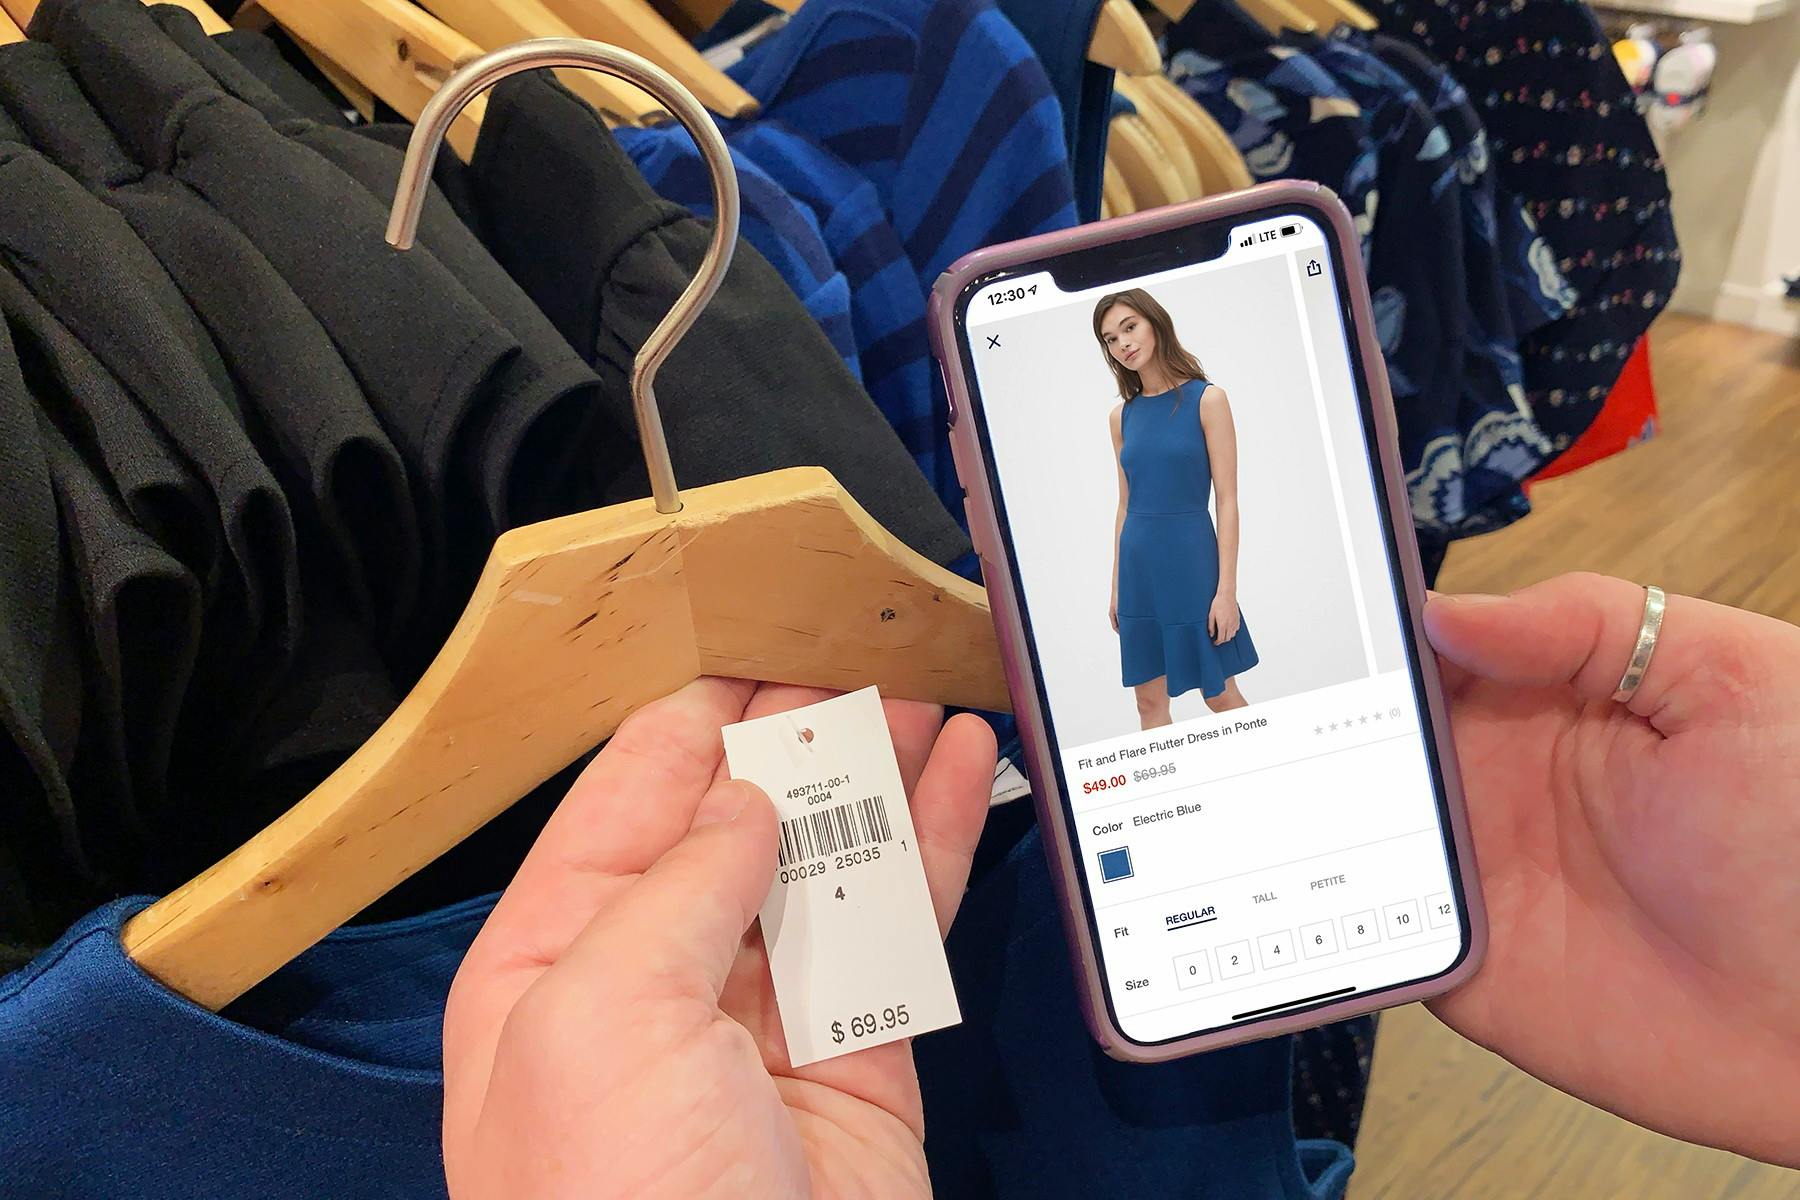 Someone holding up a price tag on a clothing item and comparing it to the same item pulled up on a phone